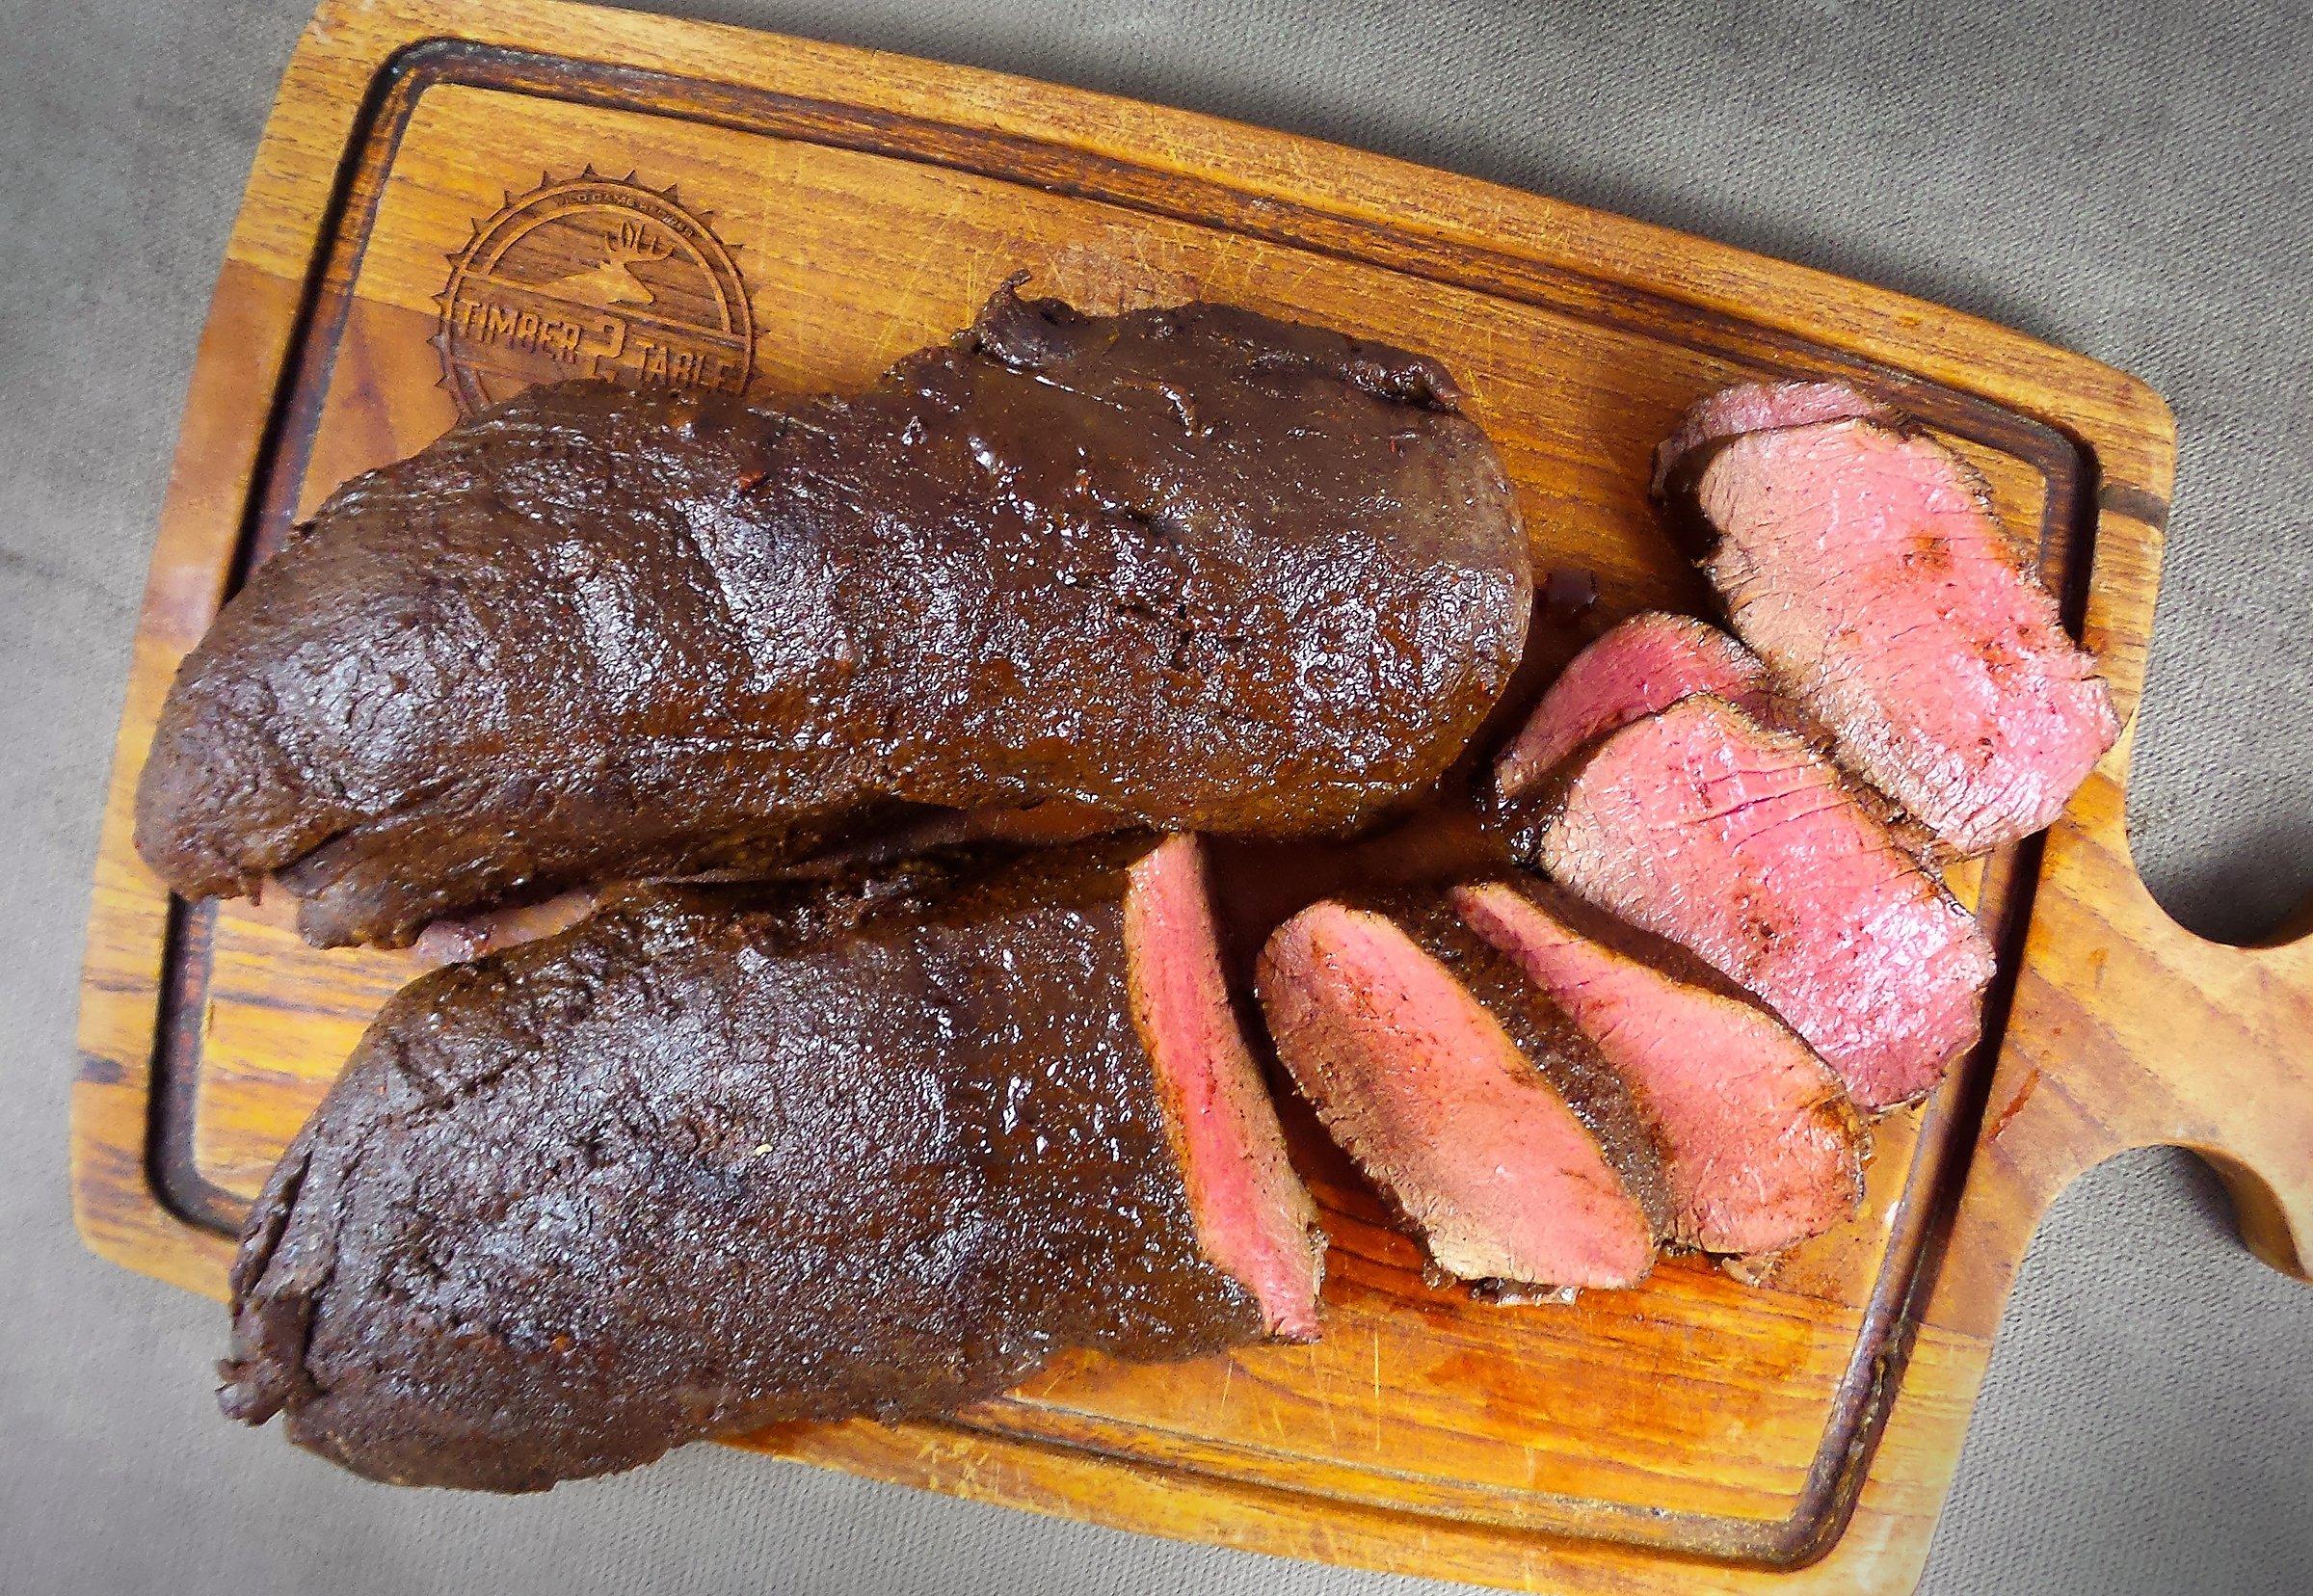 Roast the backstrap to 135 for medium-rare. Take it to 145 before resting if you prefer medium.